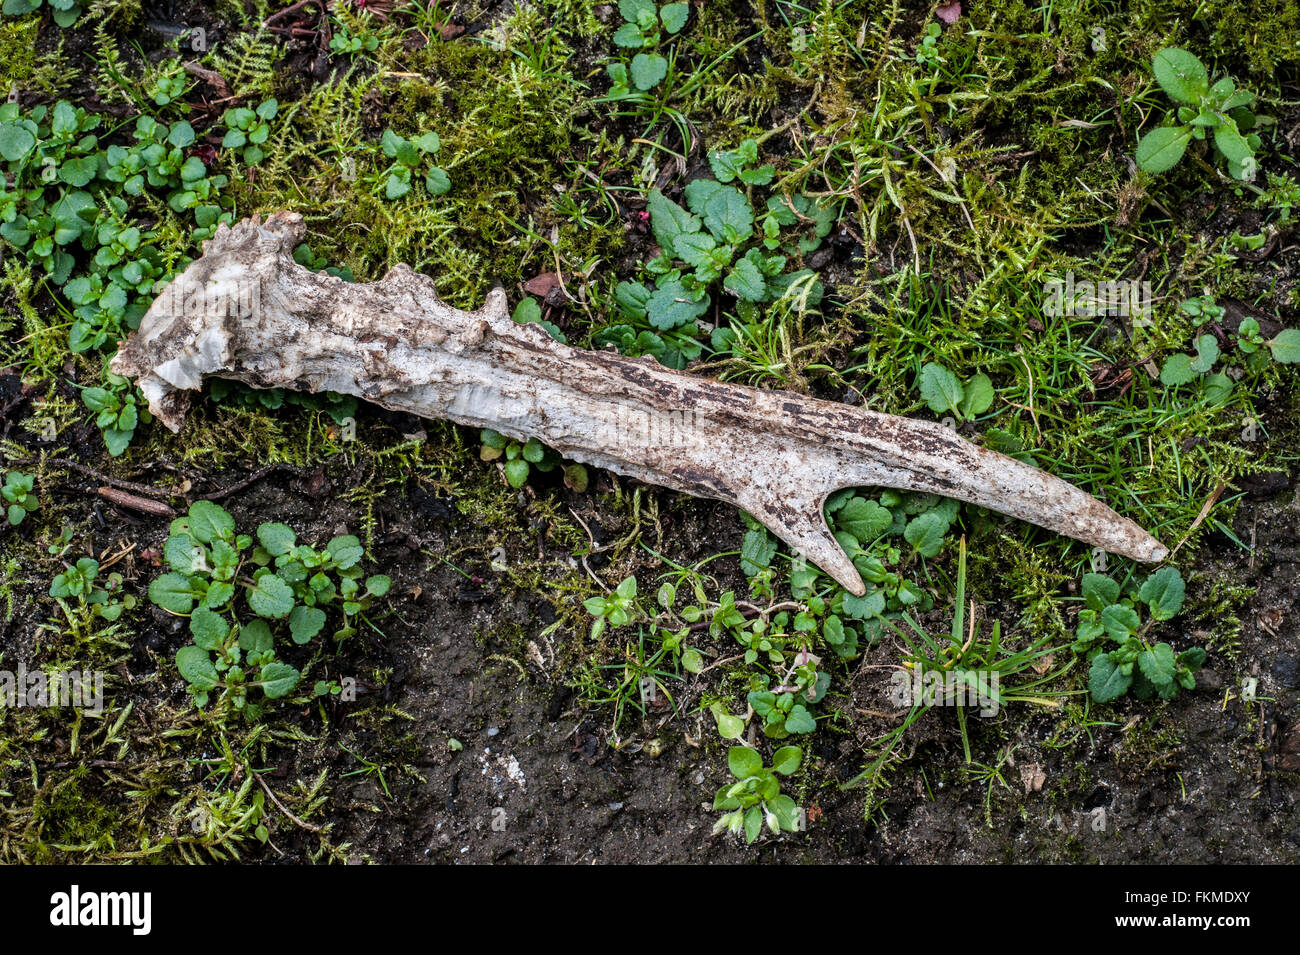 Shed antler of roe deer on forest floor, showing teeth marks and gnawed upon by mice, squirrels and rodents for the minerals Stock Photo